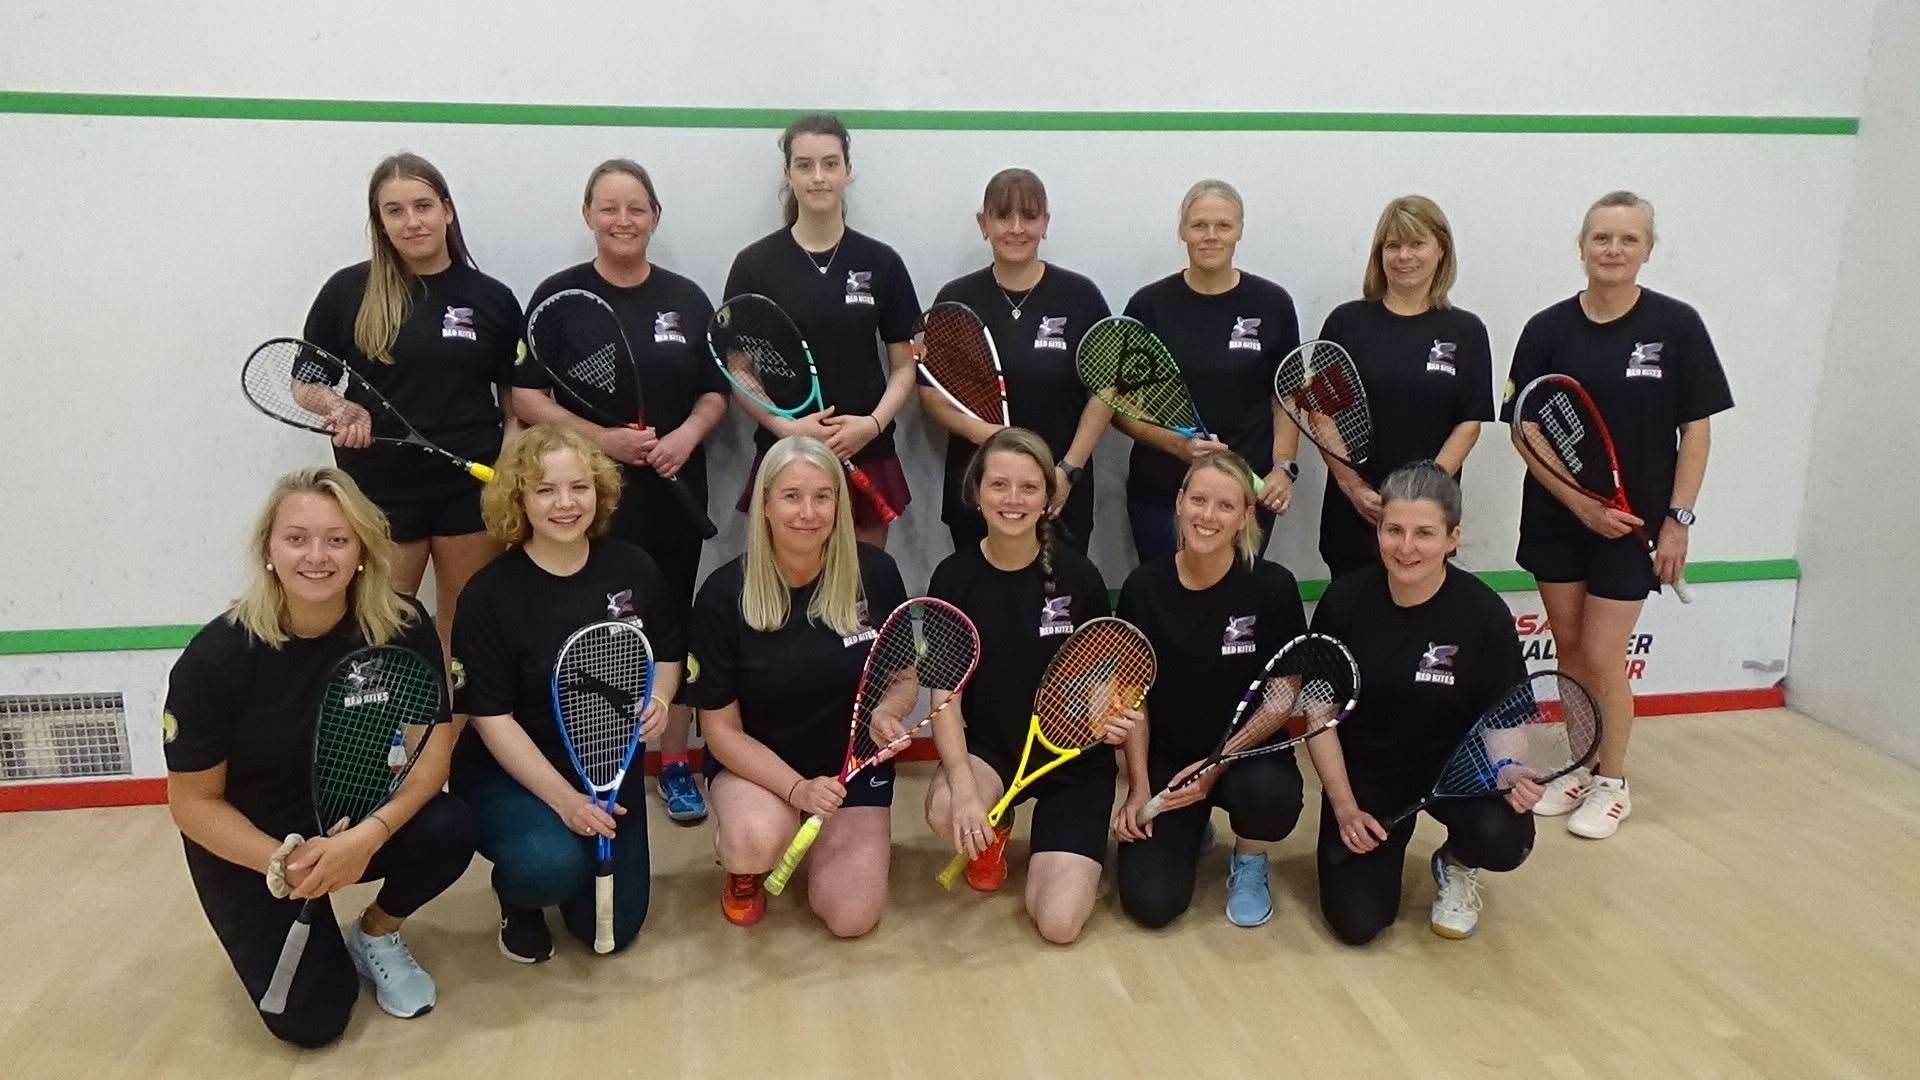 The growth of the Inverness Red Kites was a key factor in Inverness Tennis and Squash Club's nomination.